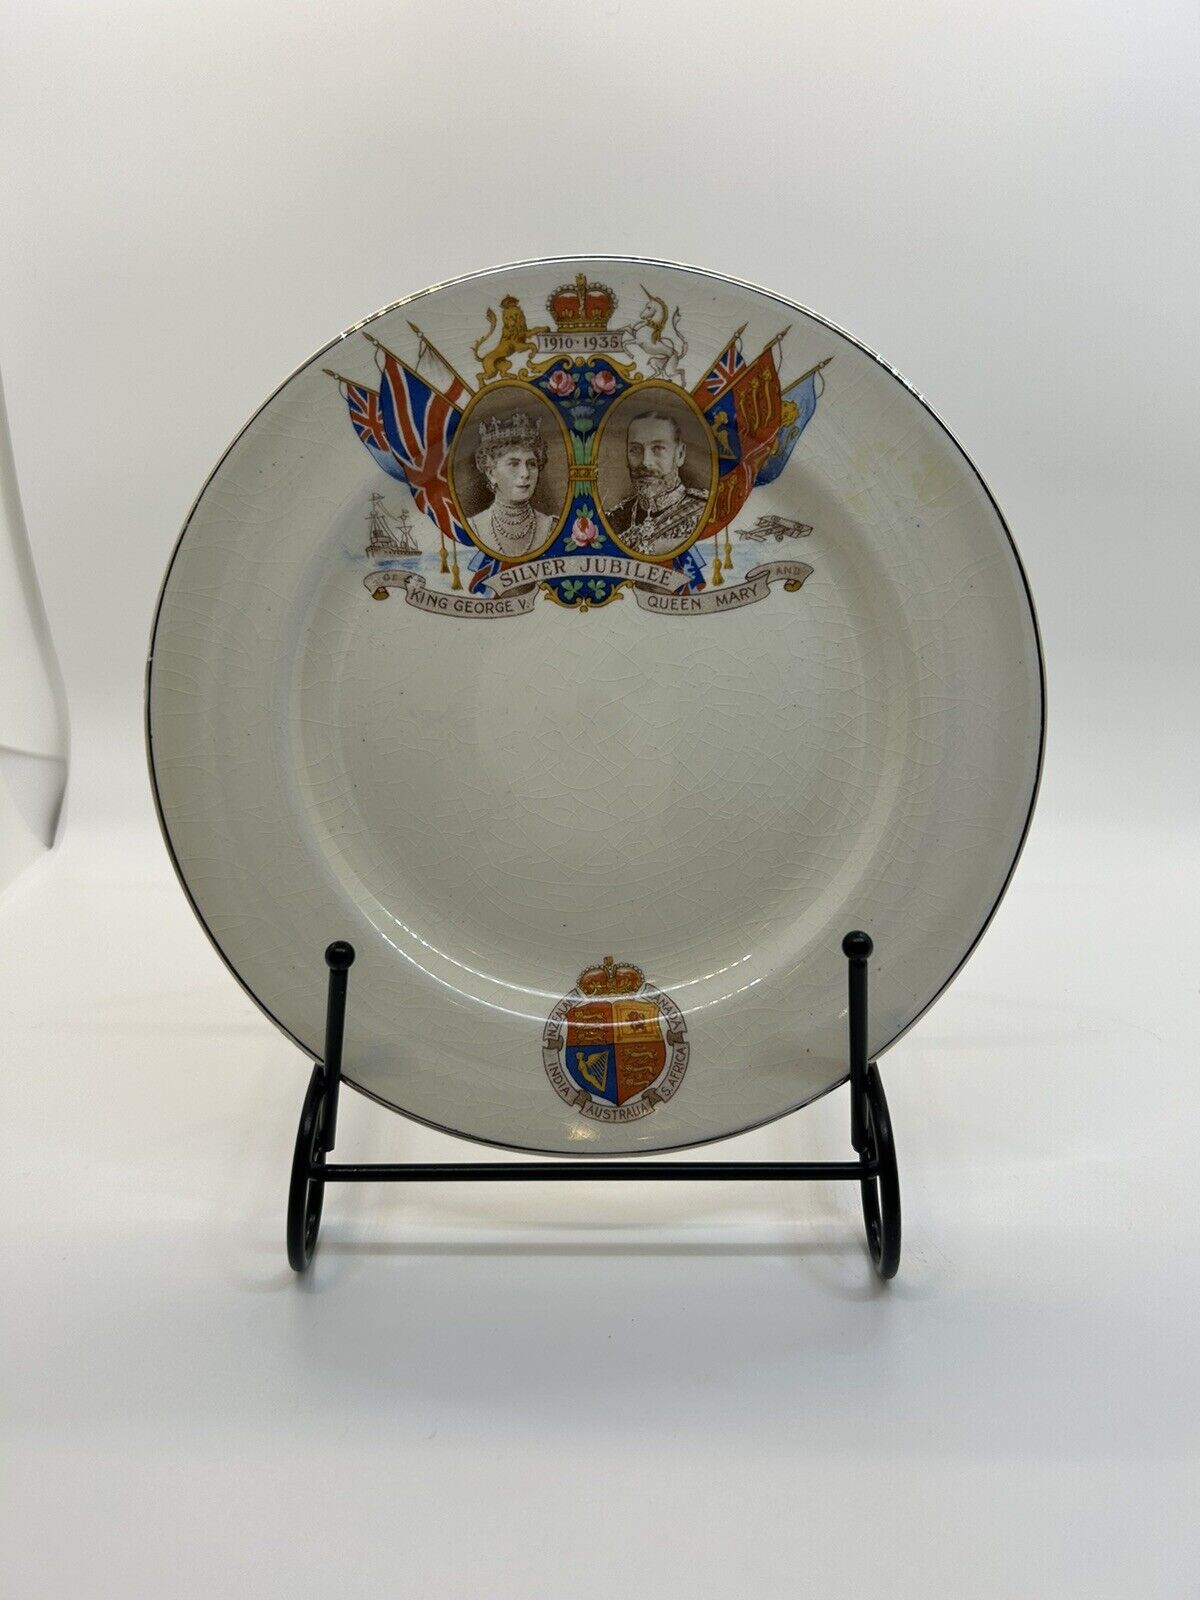 King George V & Queen Mary 1935 Silver Jubilee Plate